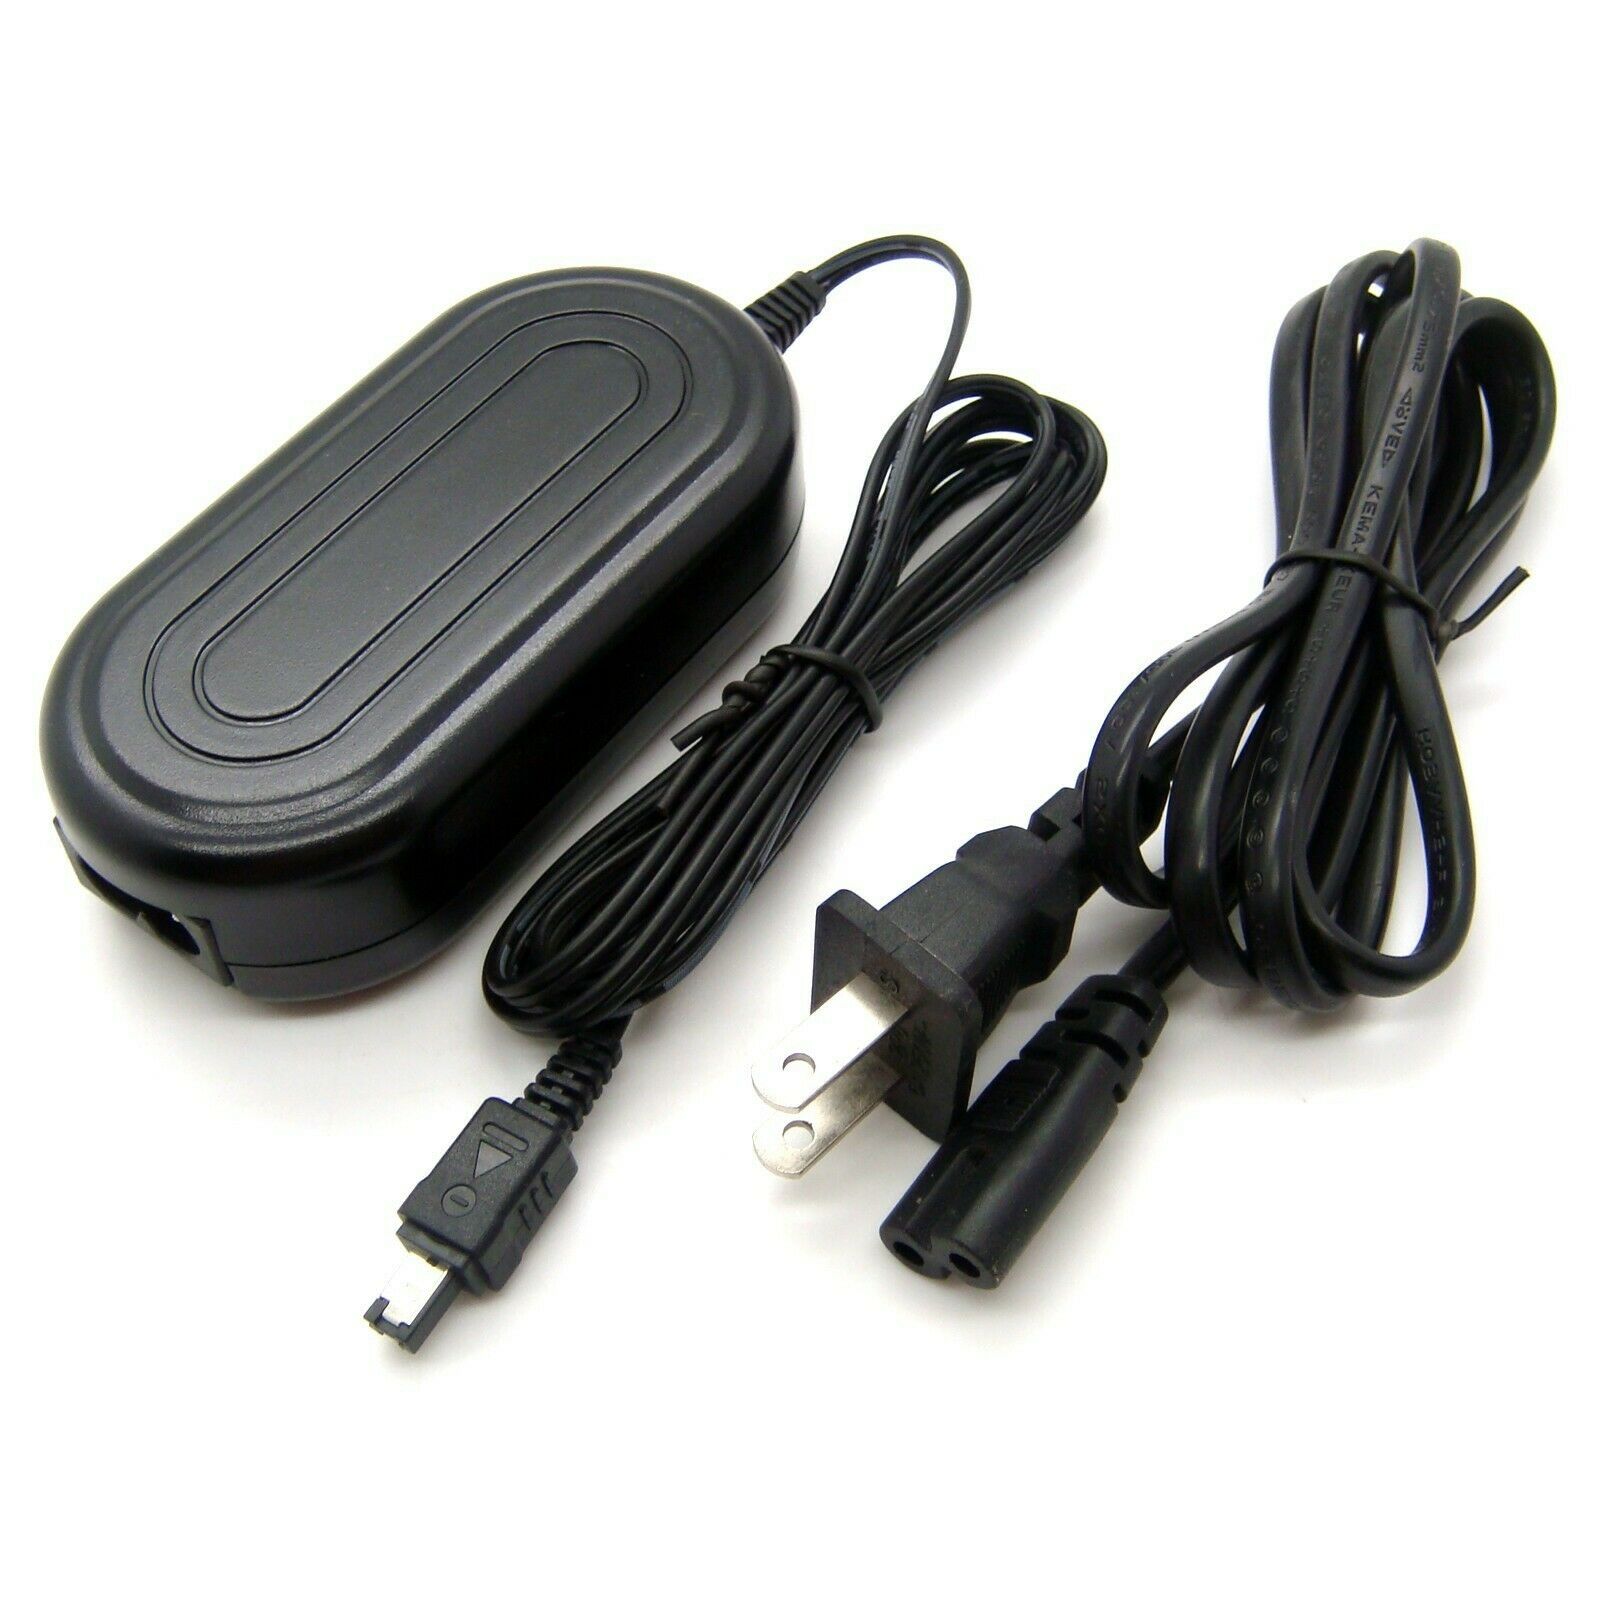 JVC GR-D741 Ac Adapter Power Supply Cord Cable Charger